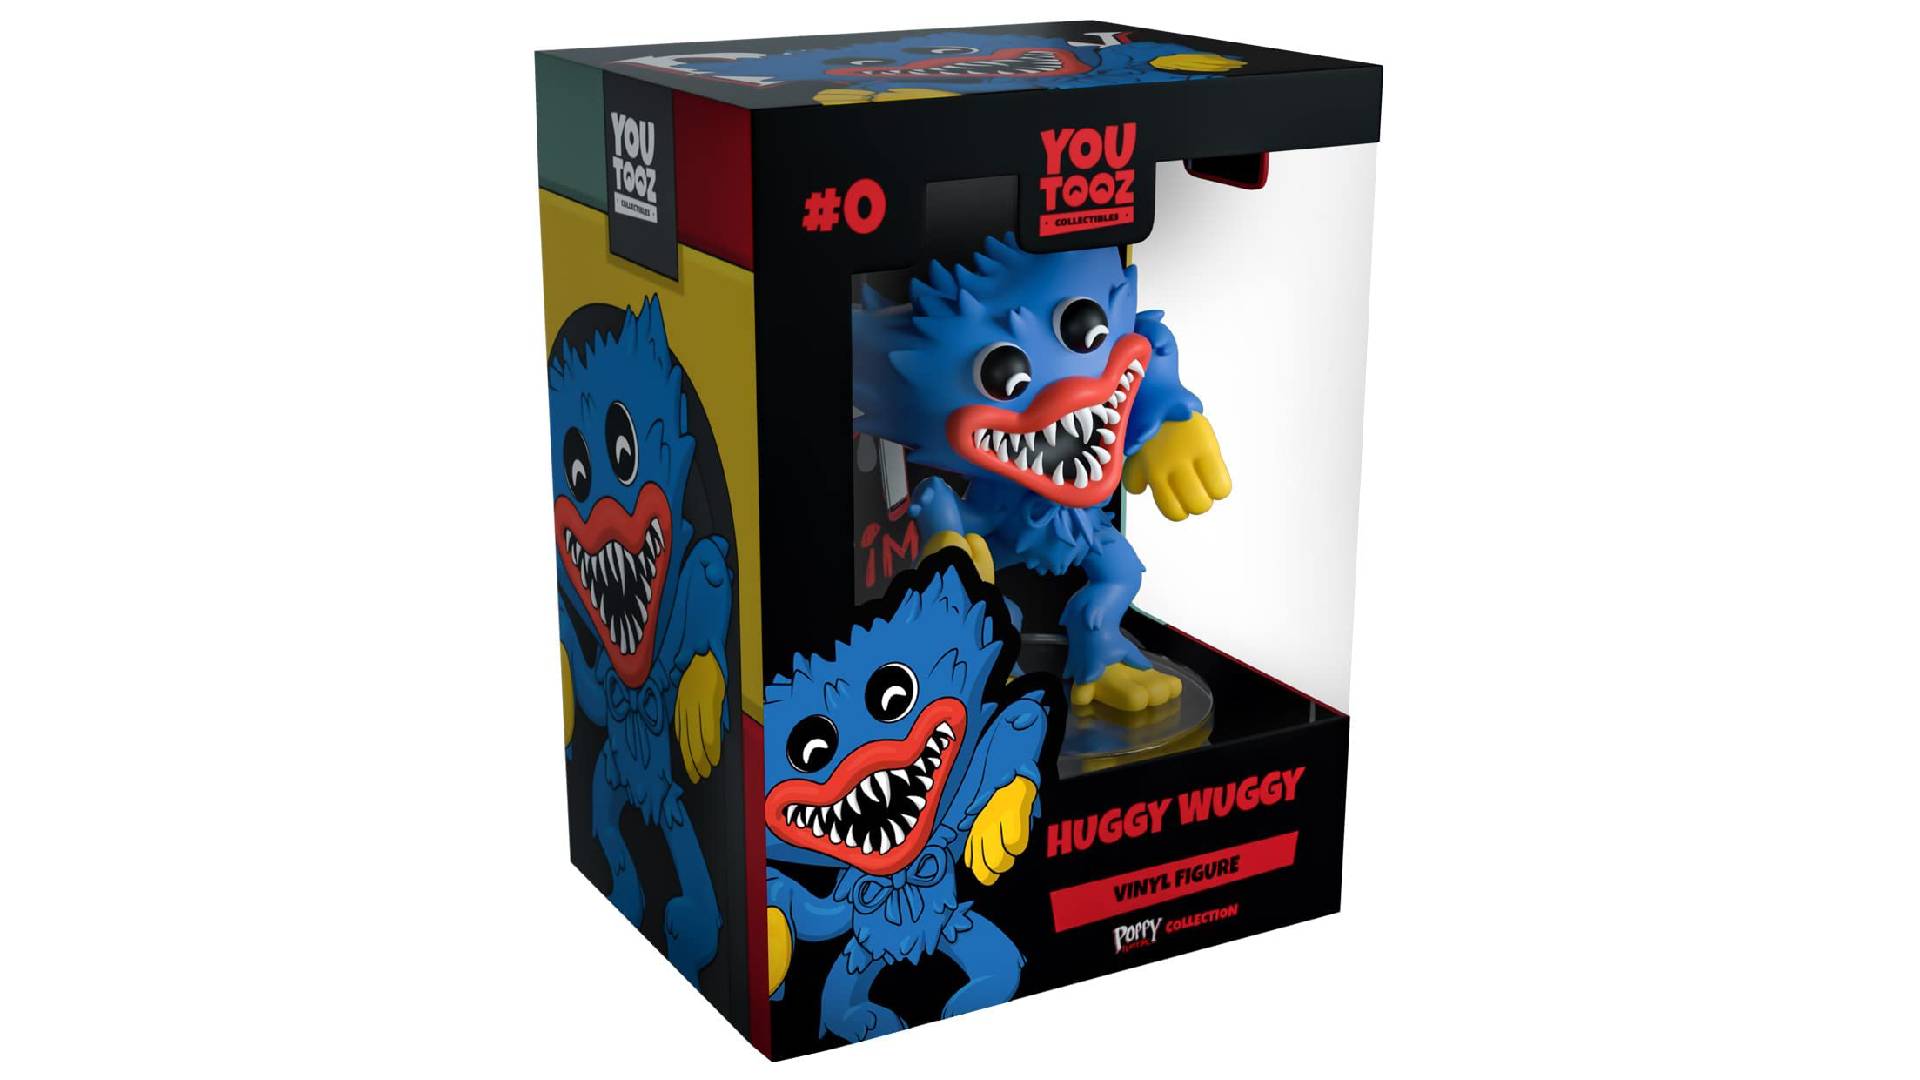 Poppy Playtime Action Figure - Huggy Wuggy